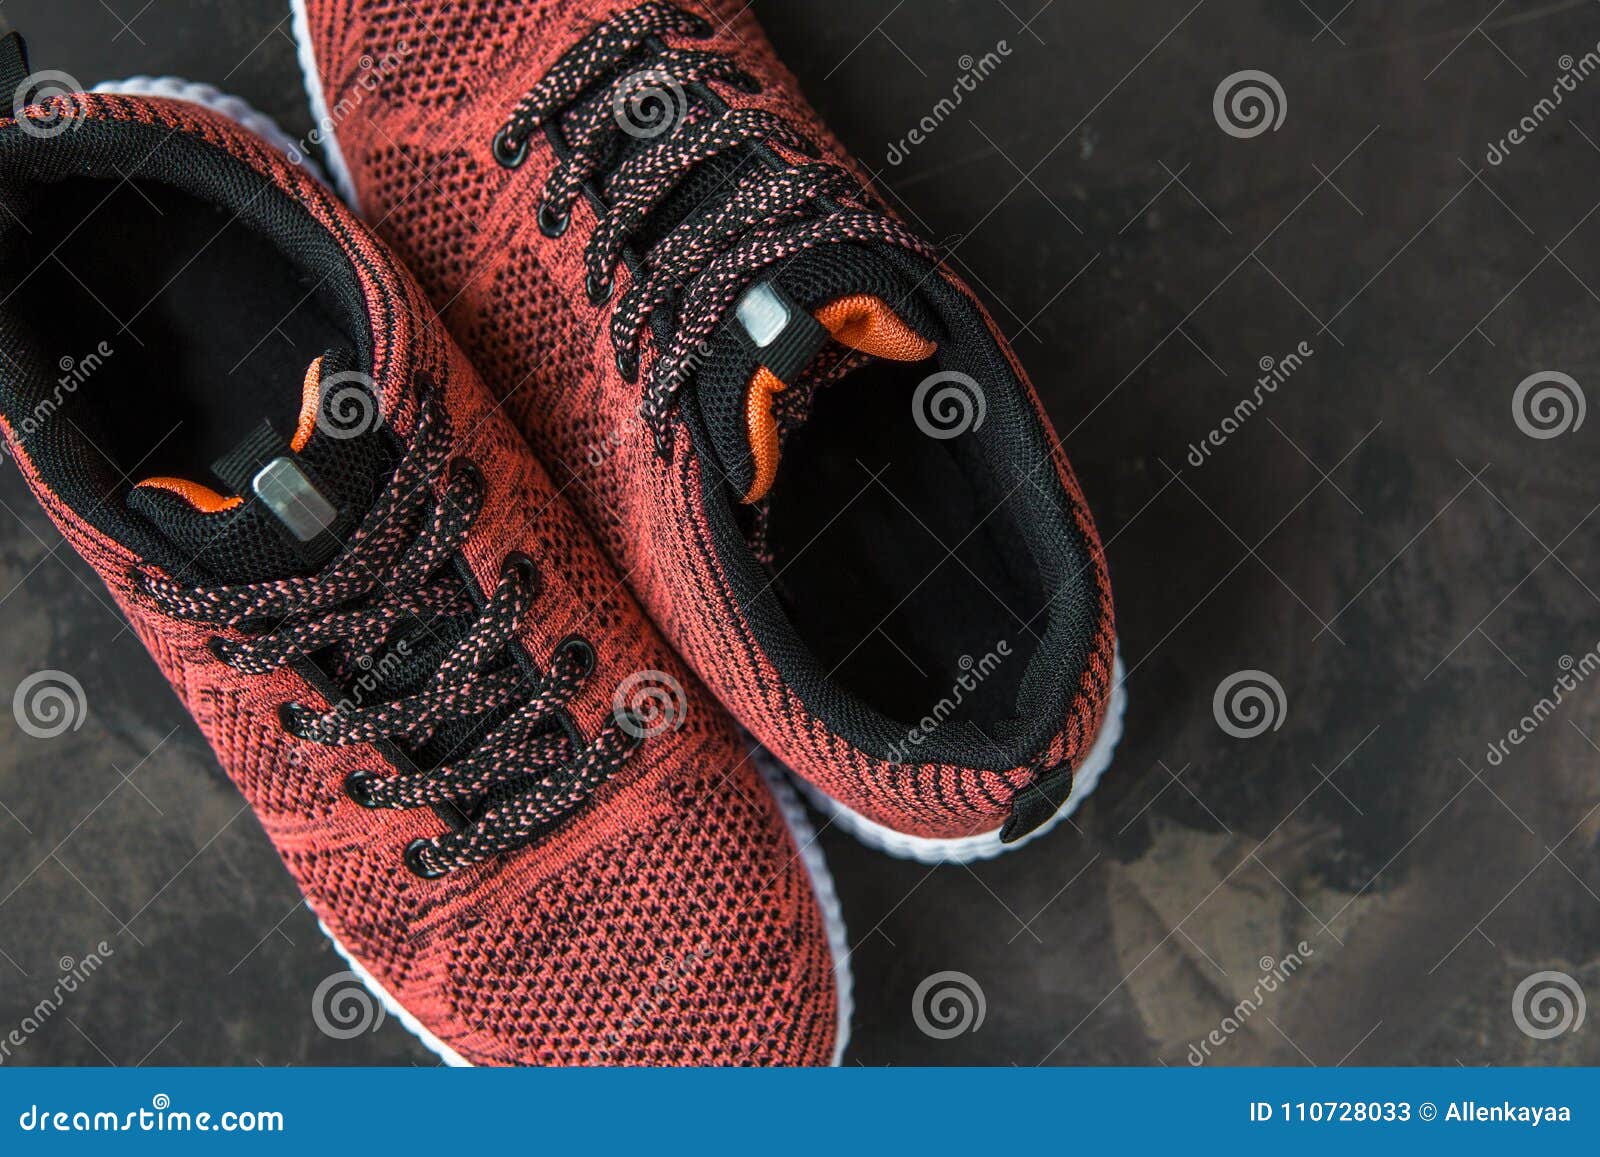 Sneakers for Woman. Footwear for Fitness and Sport Stock Image - Image ...